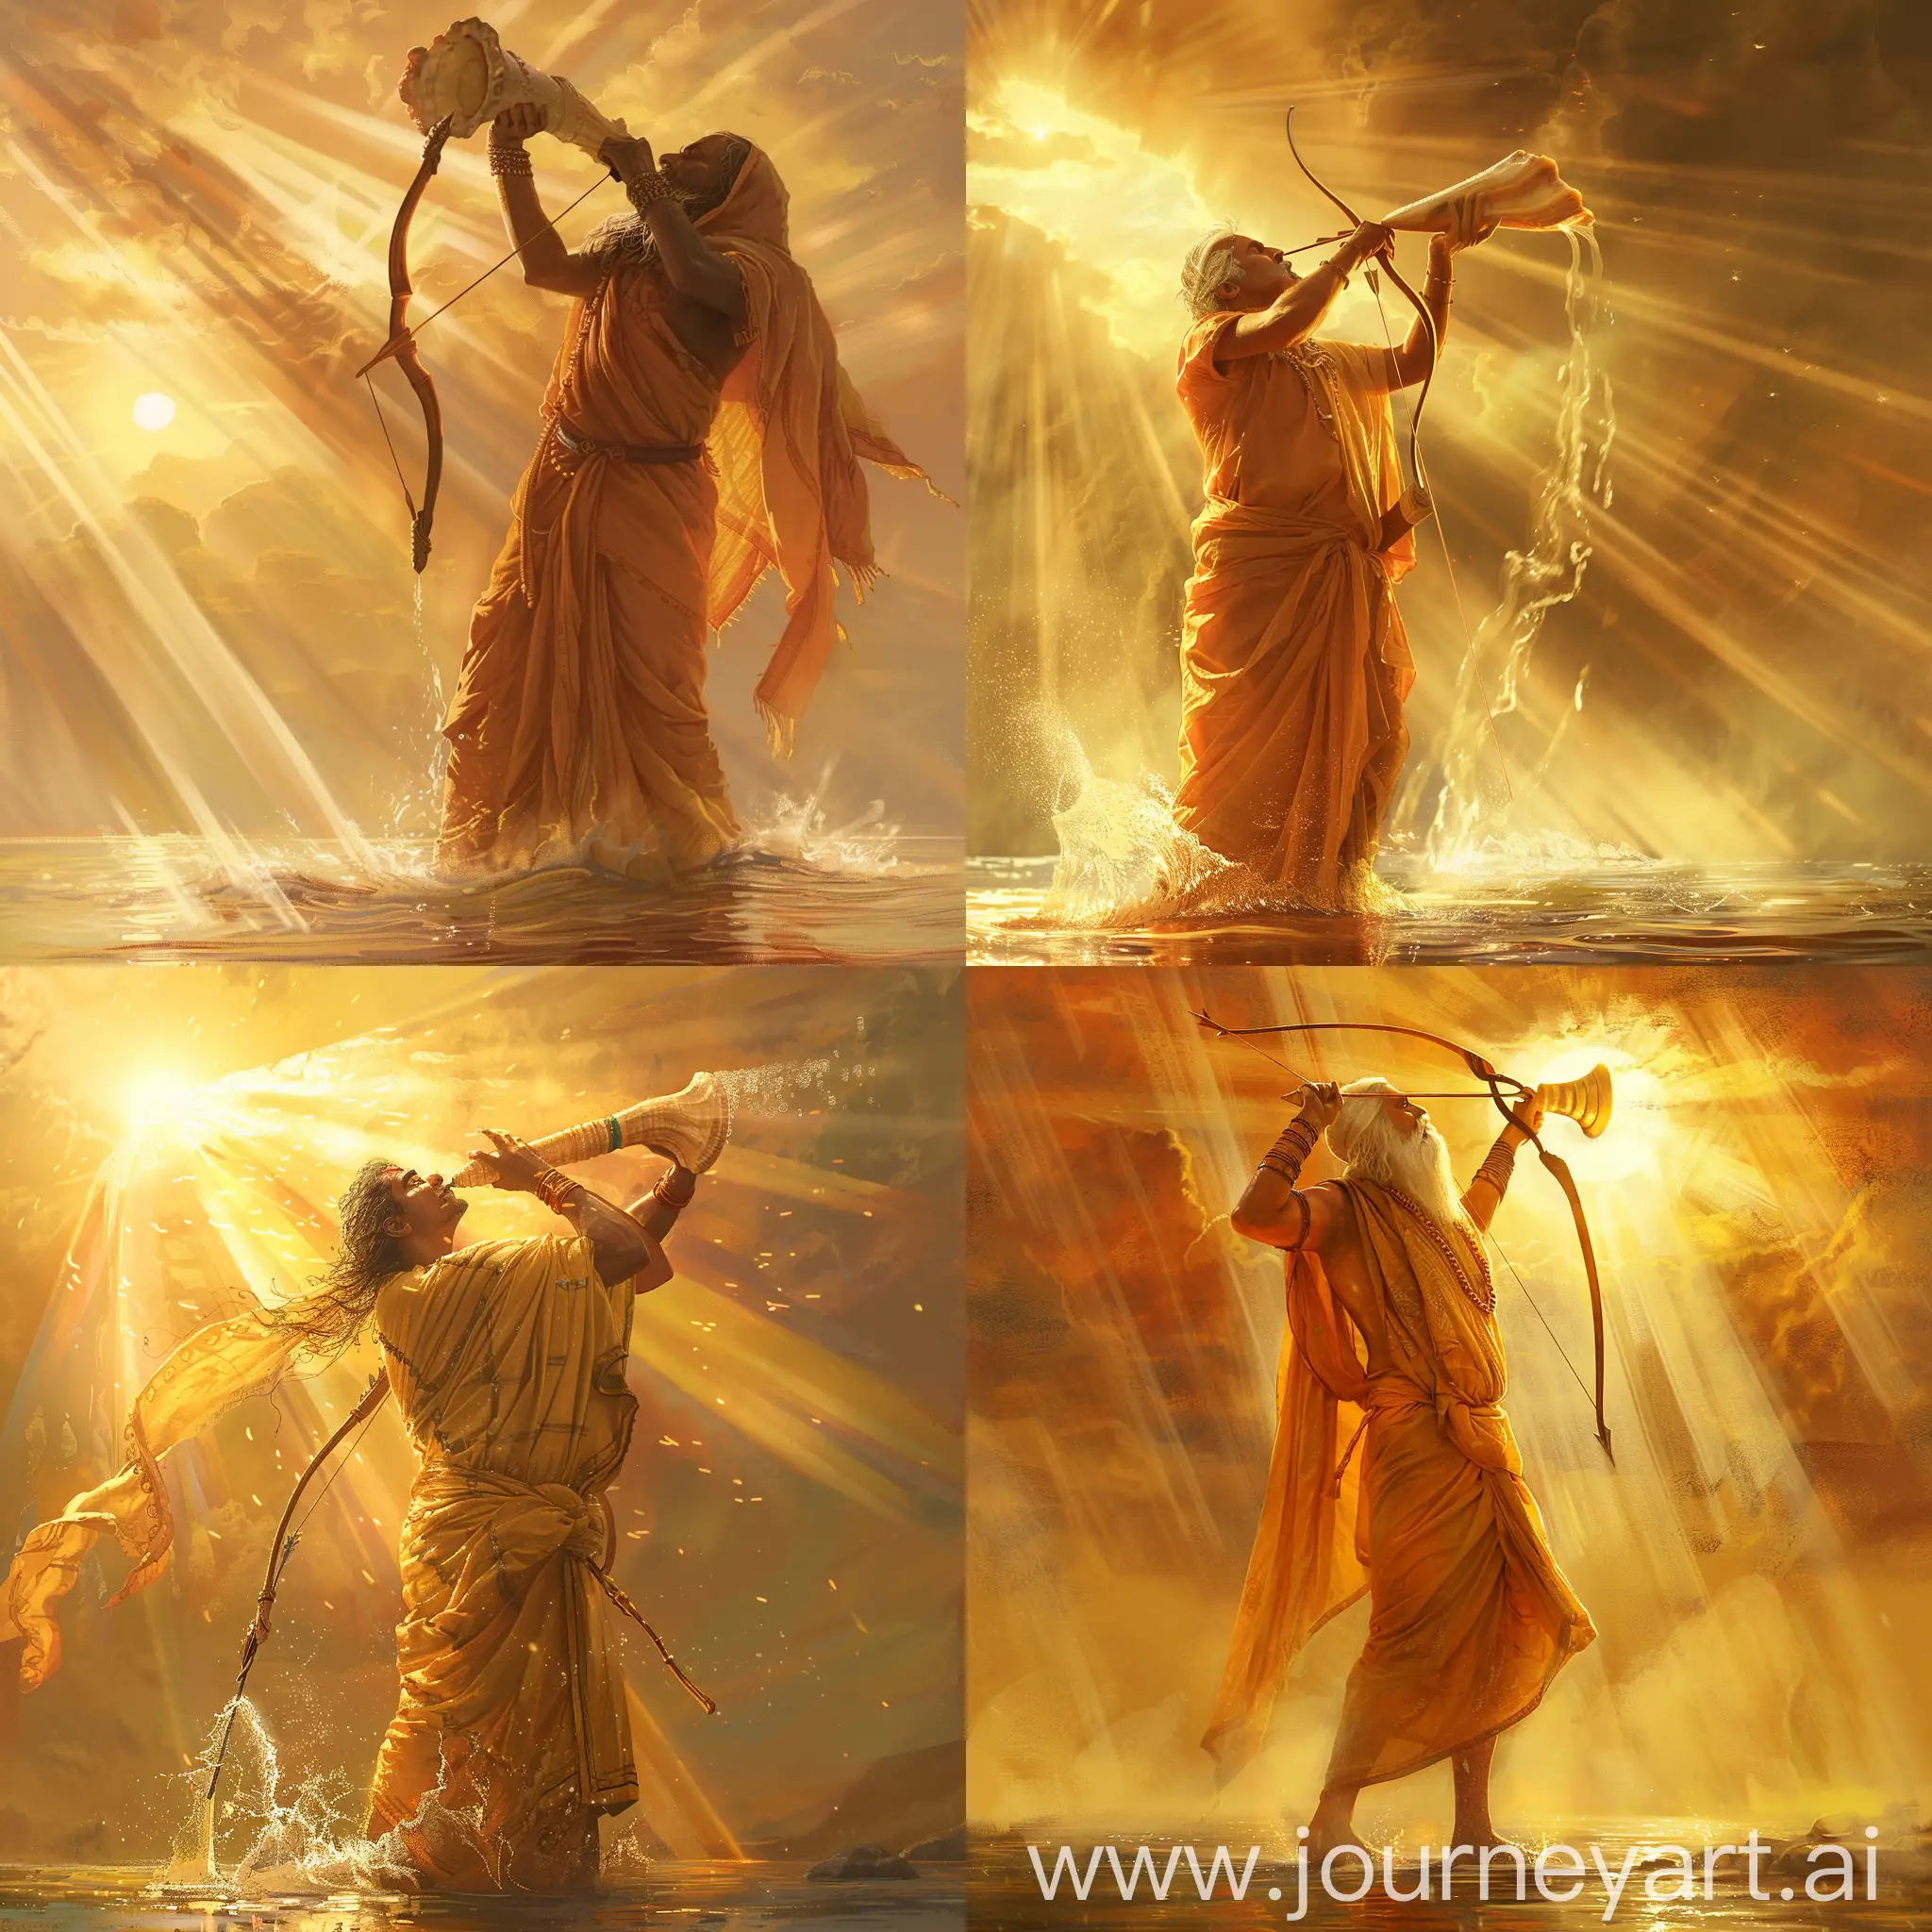 A sage in saffron robes of India blowing a conch shell towards the sky with right hand holding a bow in left hand with the rays of the sun shining behind him and the Ganges water touching his feet. I want prompt